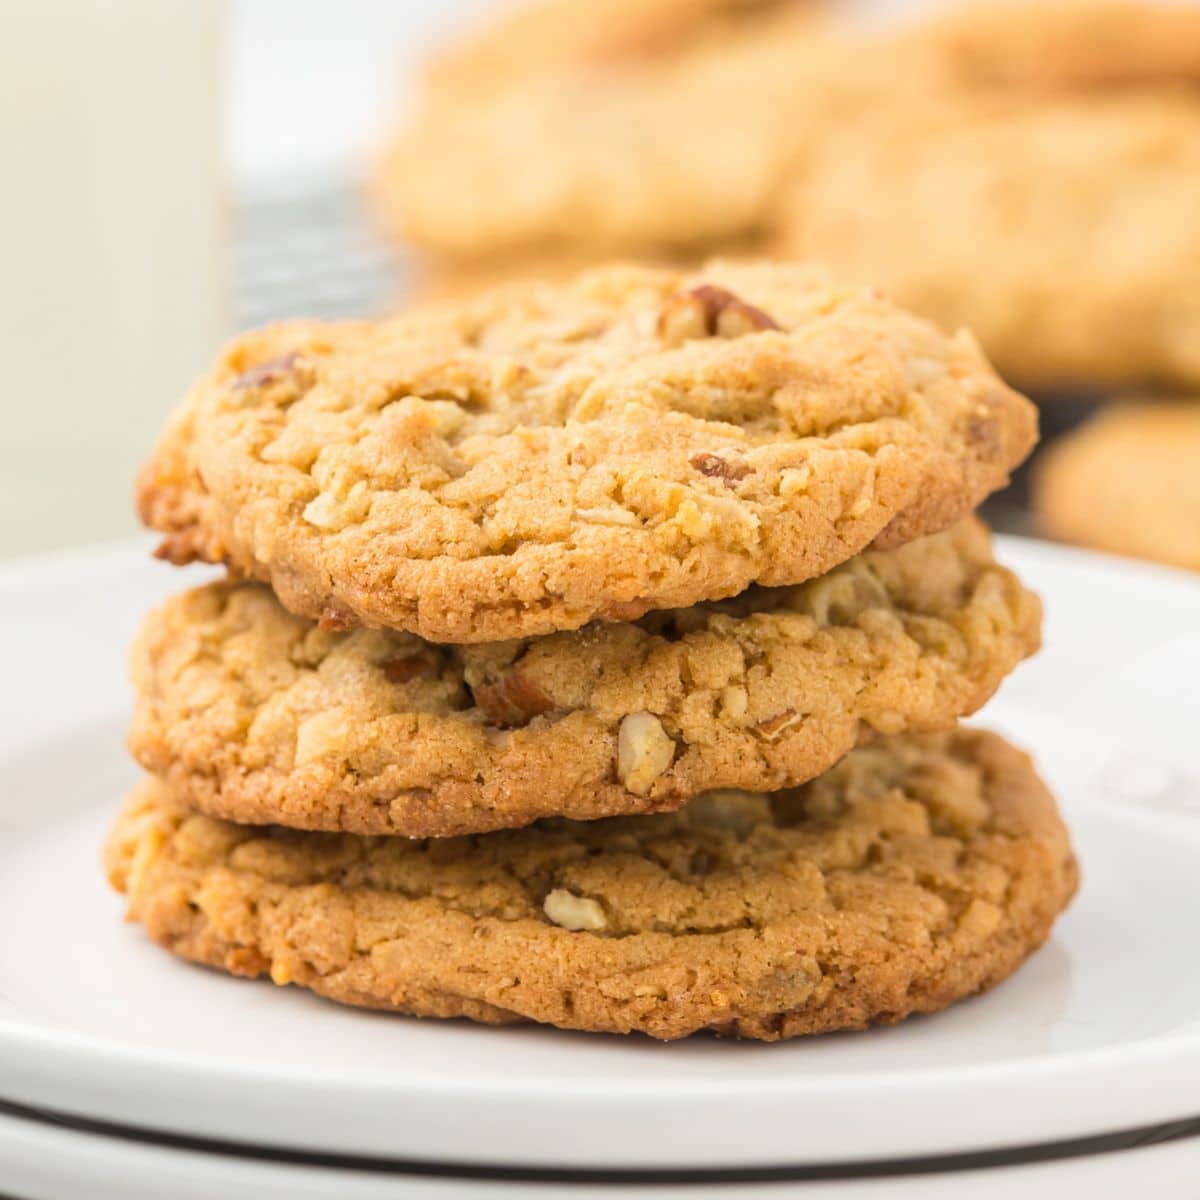 A stack of three Coconut Pecan Cookies.